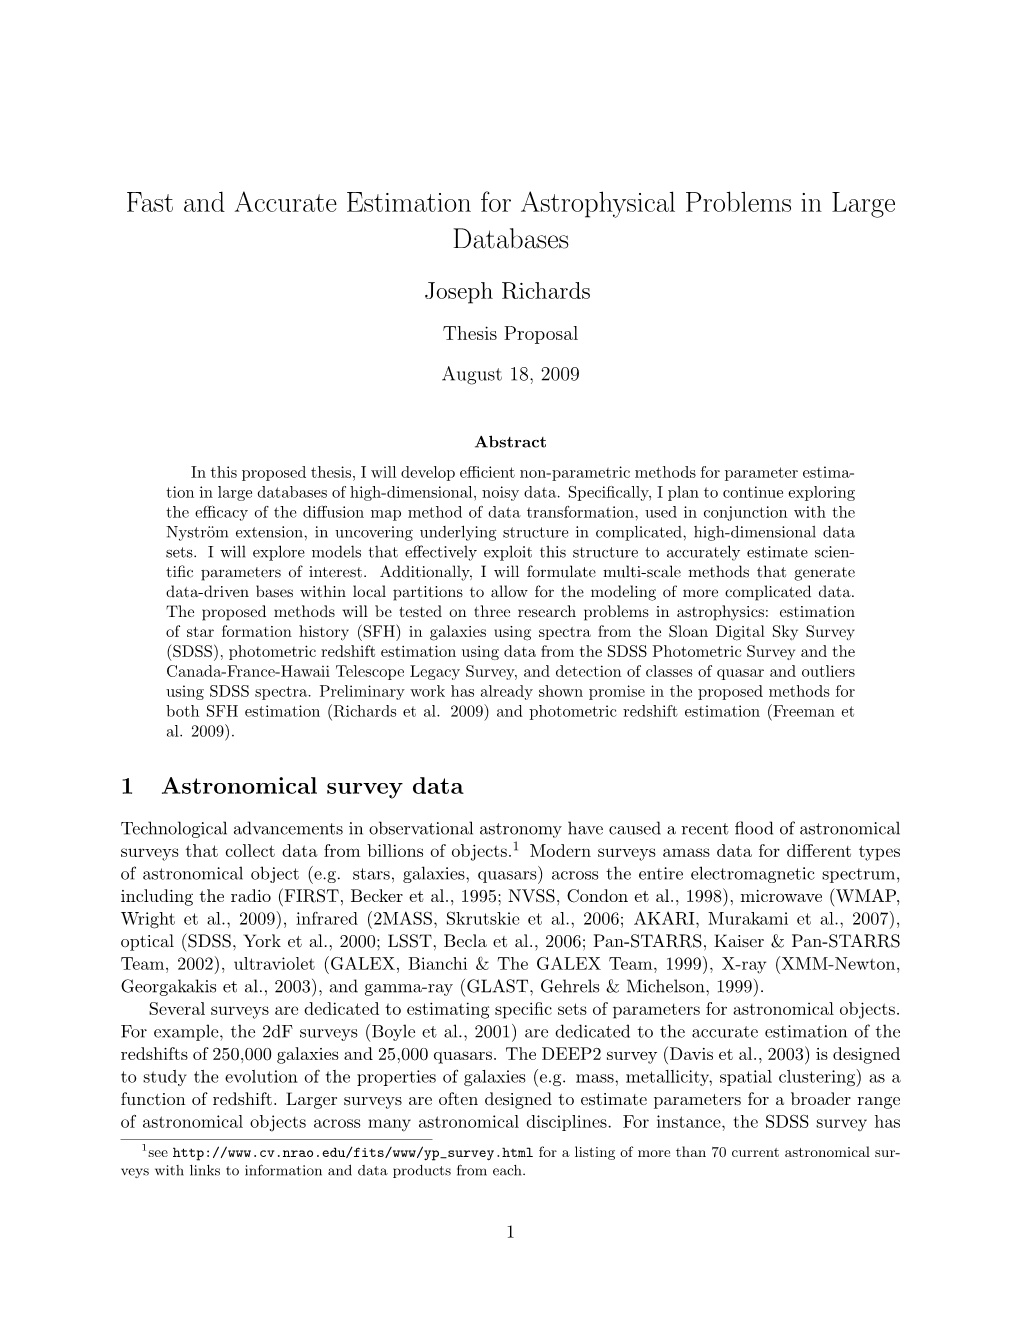 Fast and Accurate Estimation for Astrophysical Problems in Large Databases